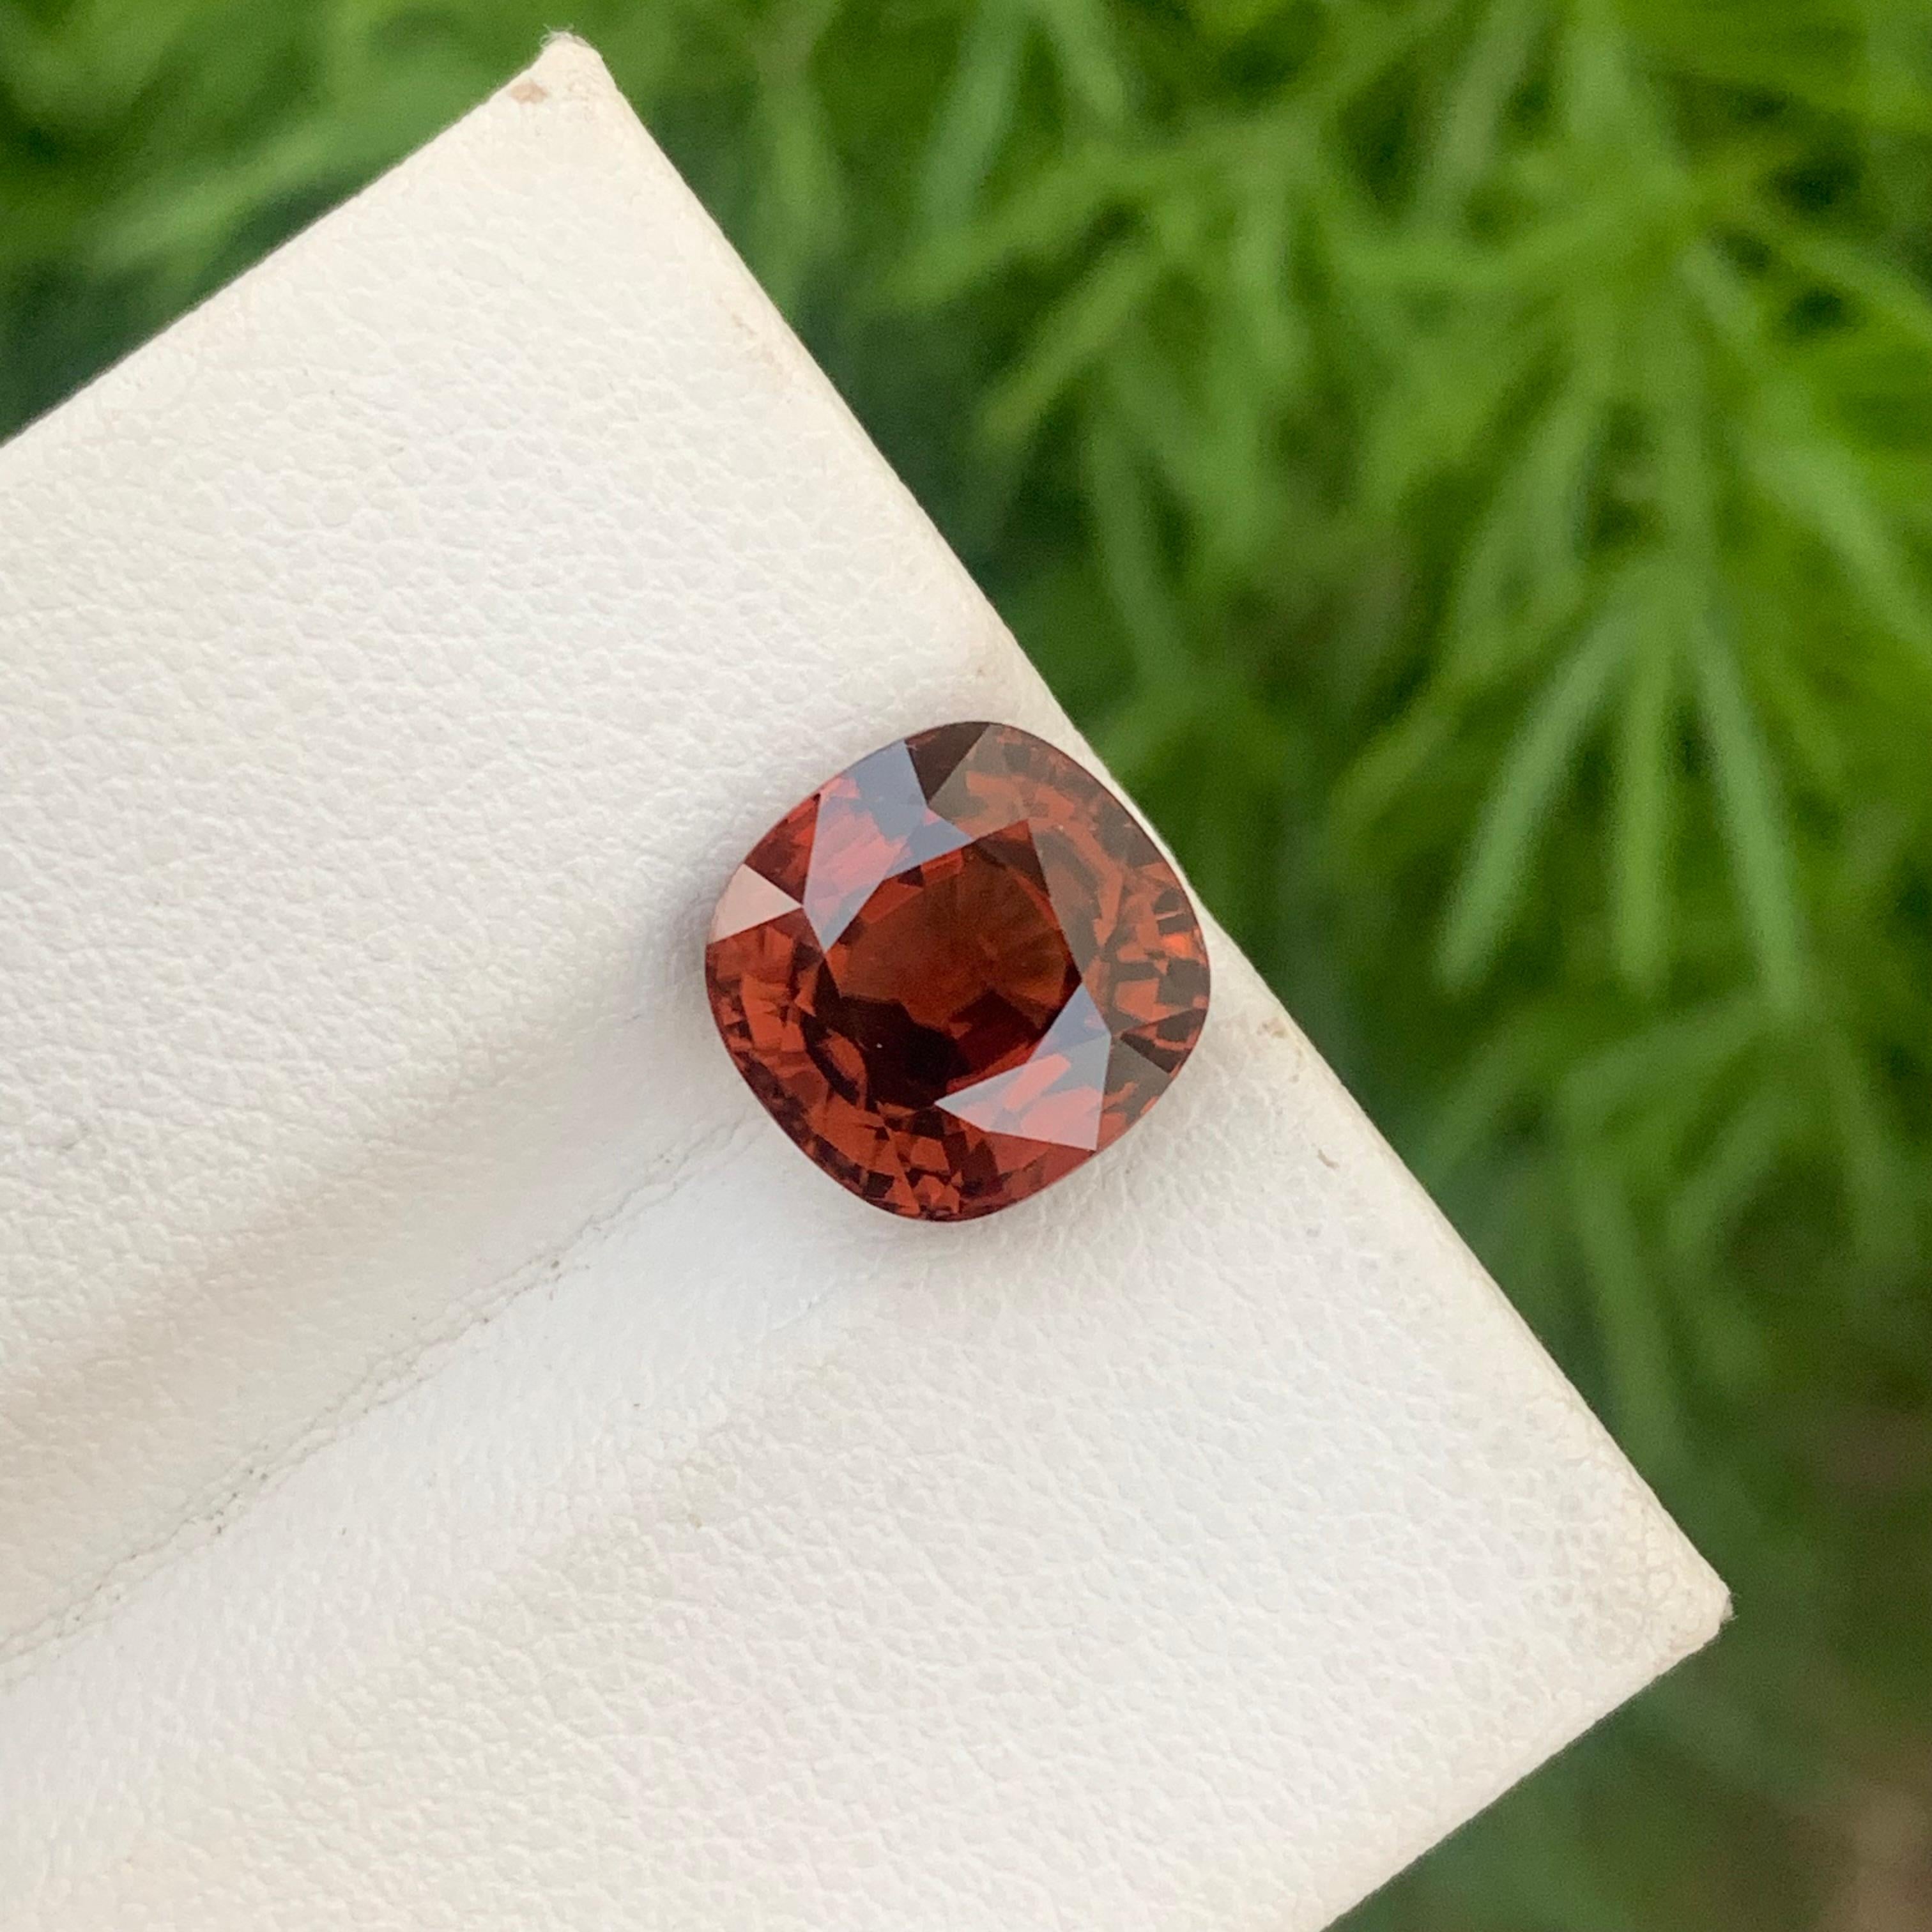 Antique Cushion Cut Sparkling 7.10 Carats Natural Brown Orange Loose Zircon Ring Gem From Cambodia For Sale